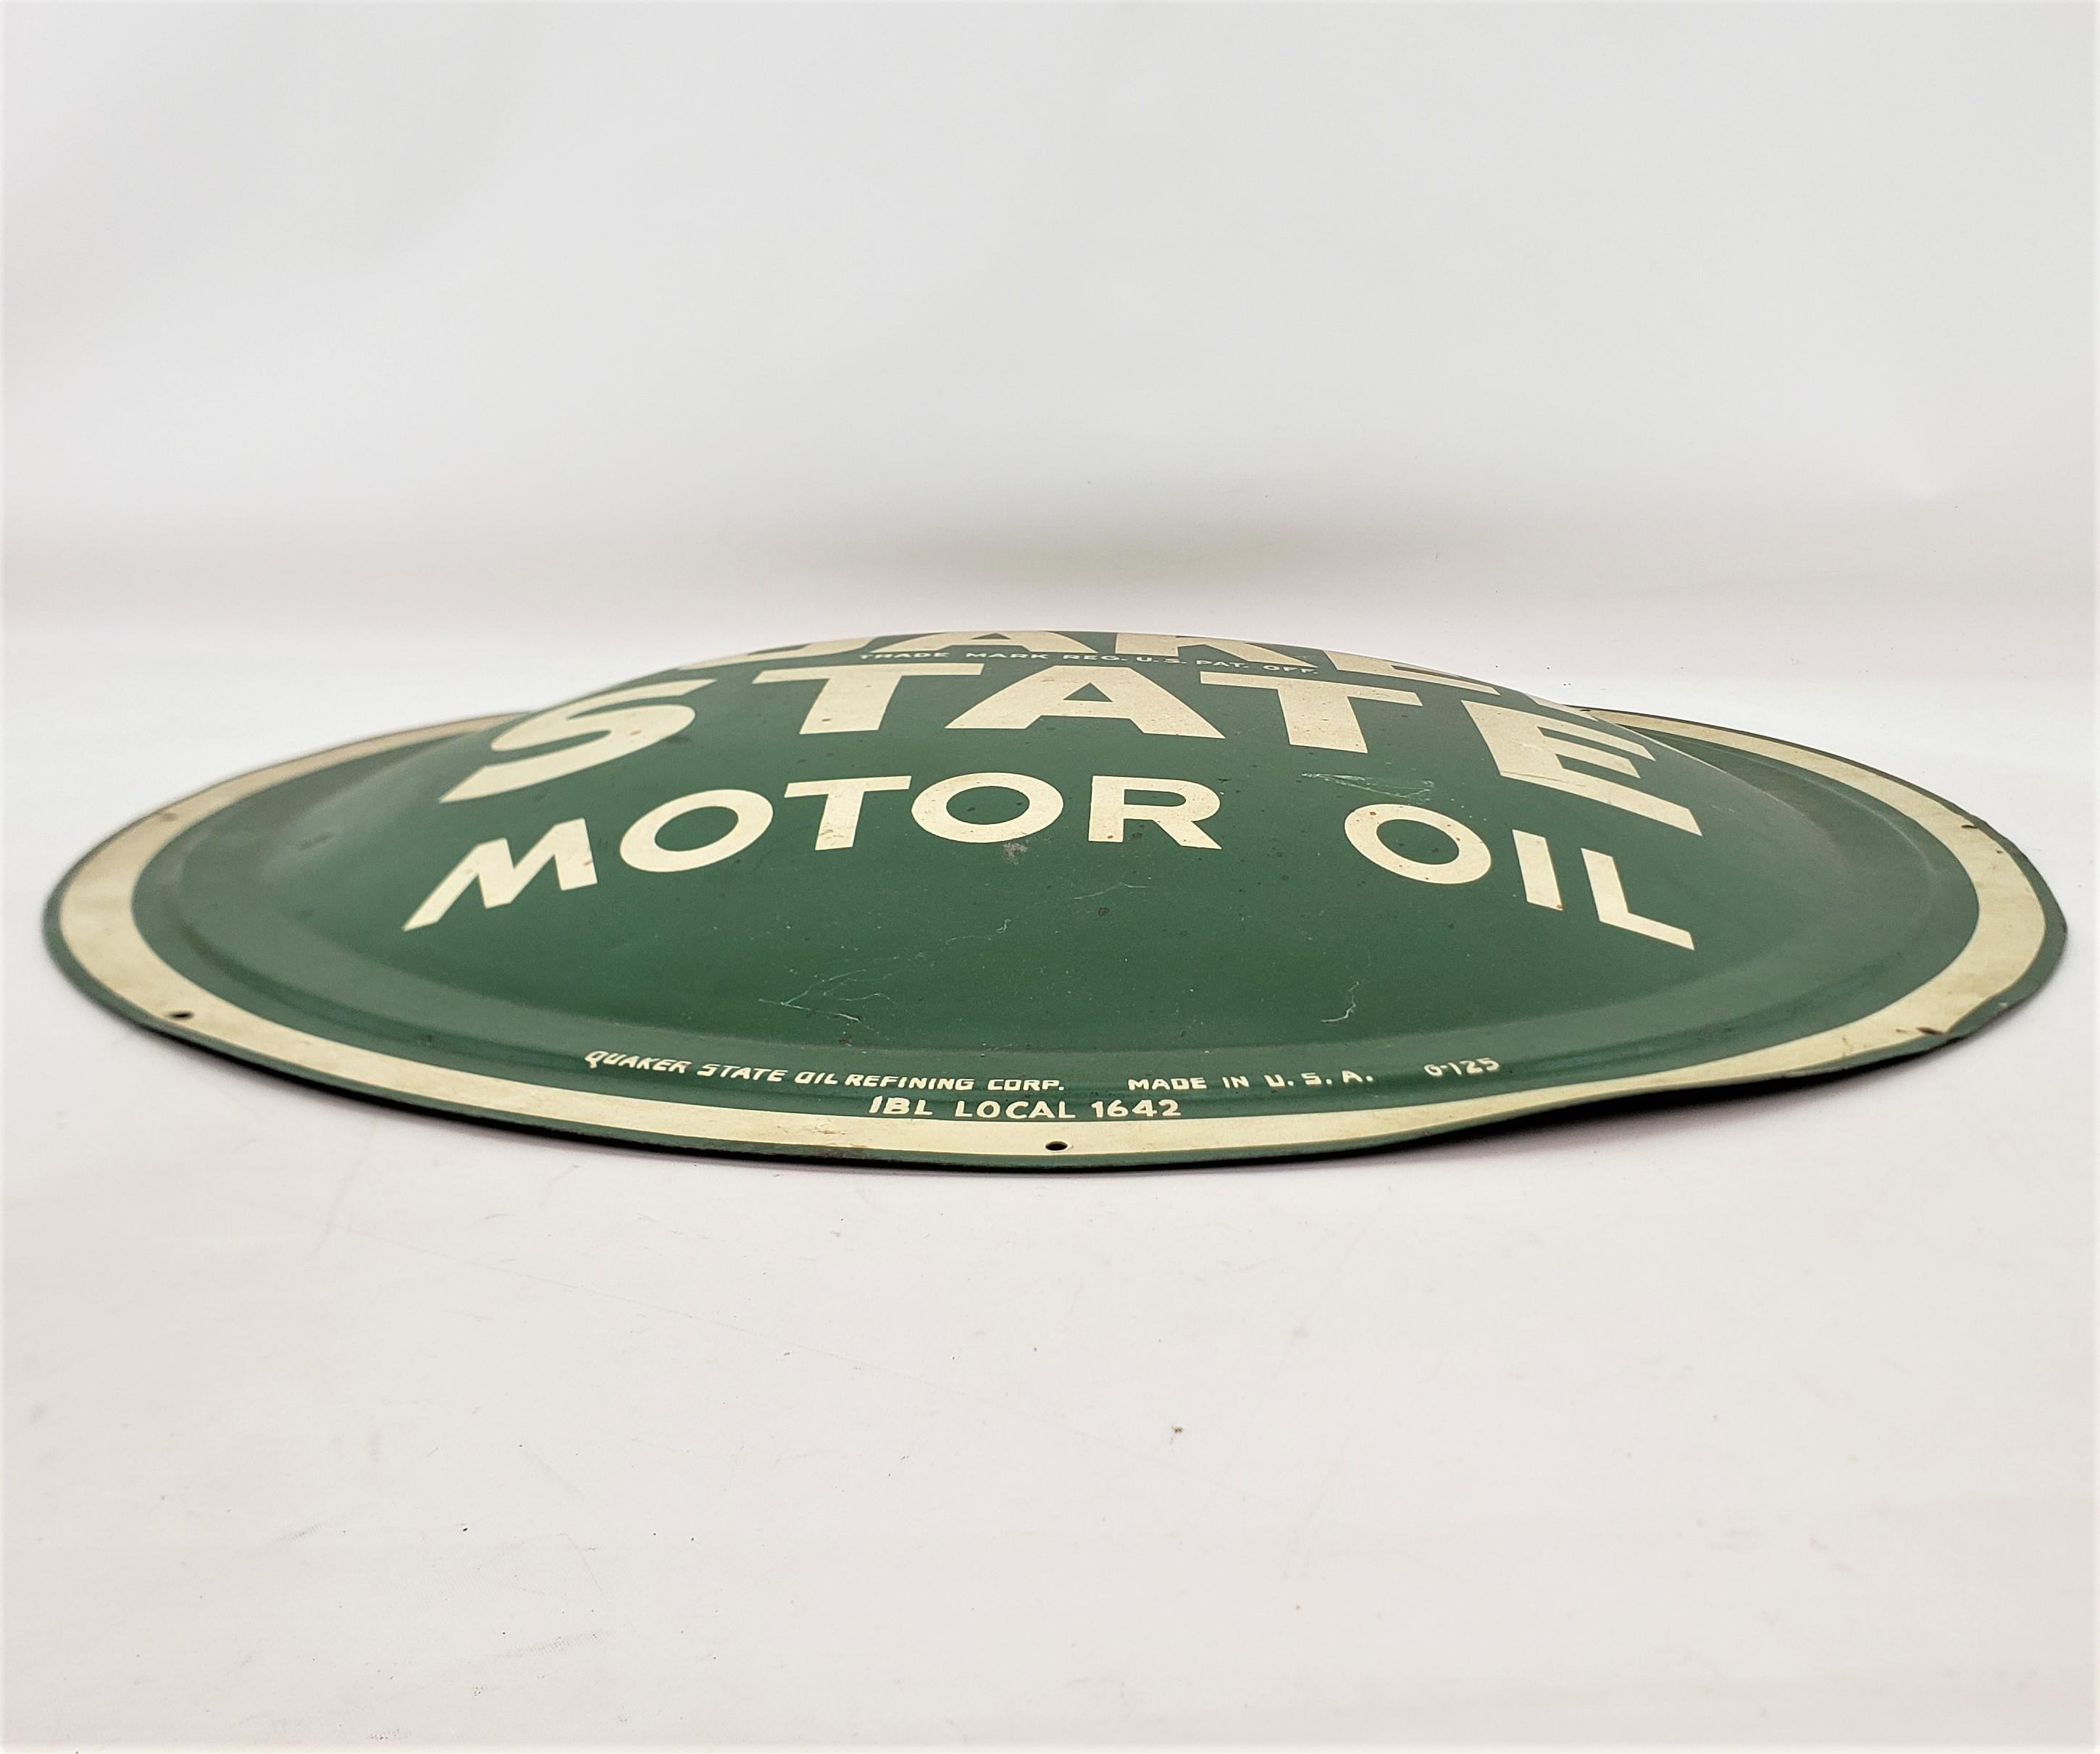 Machine-Made Midcentury Quaker State Motor Oil Gas Station Metal Advertising 'Button' Sign